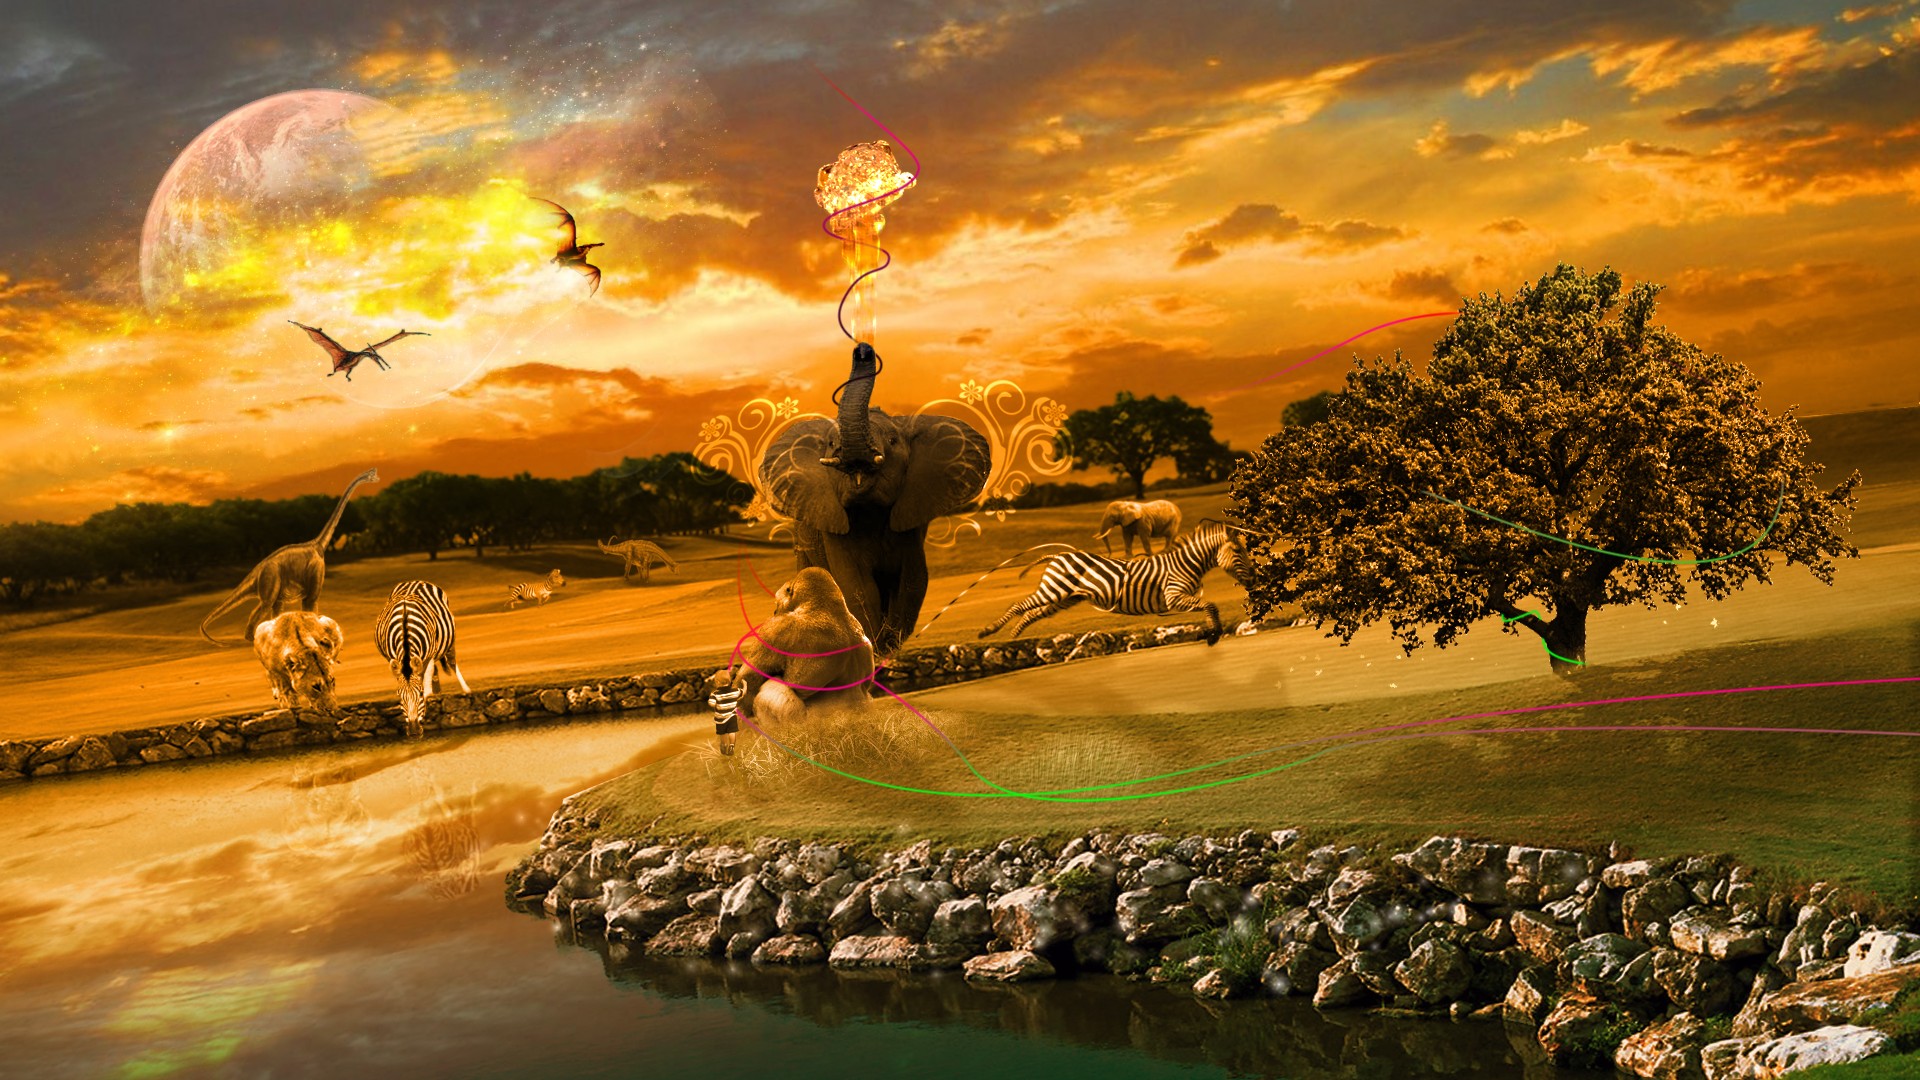 Get Fantasy Africa Wilds Desktop And Make This Wallpaper For